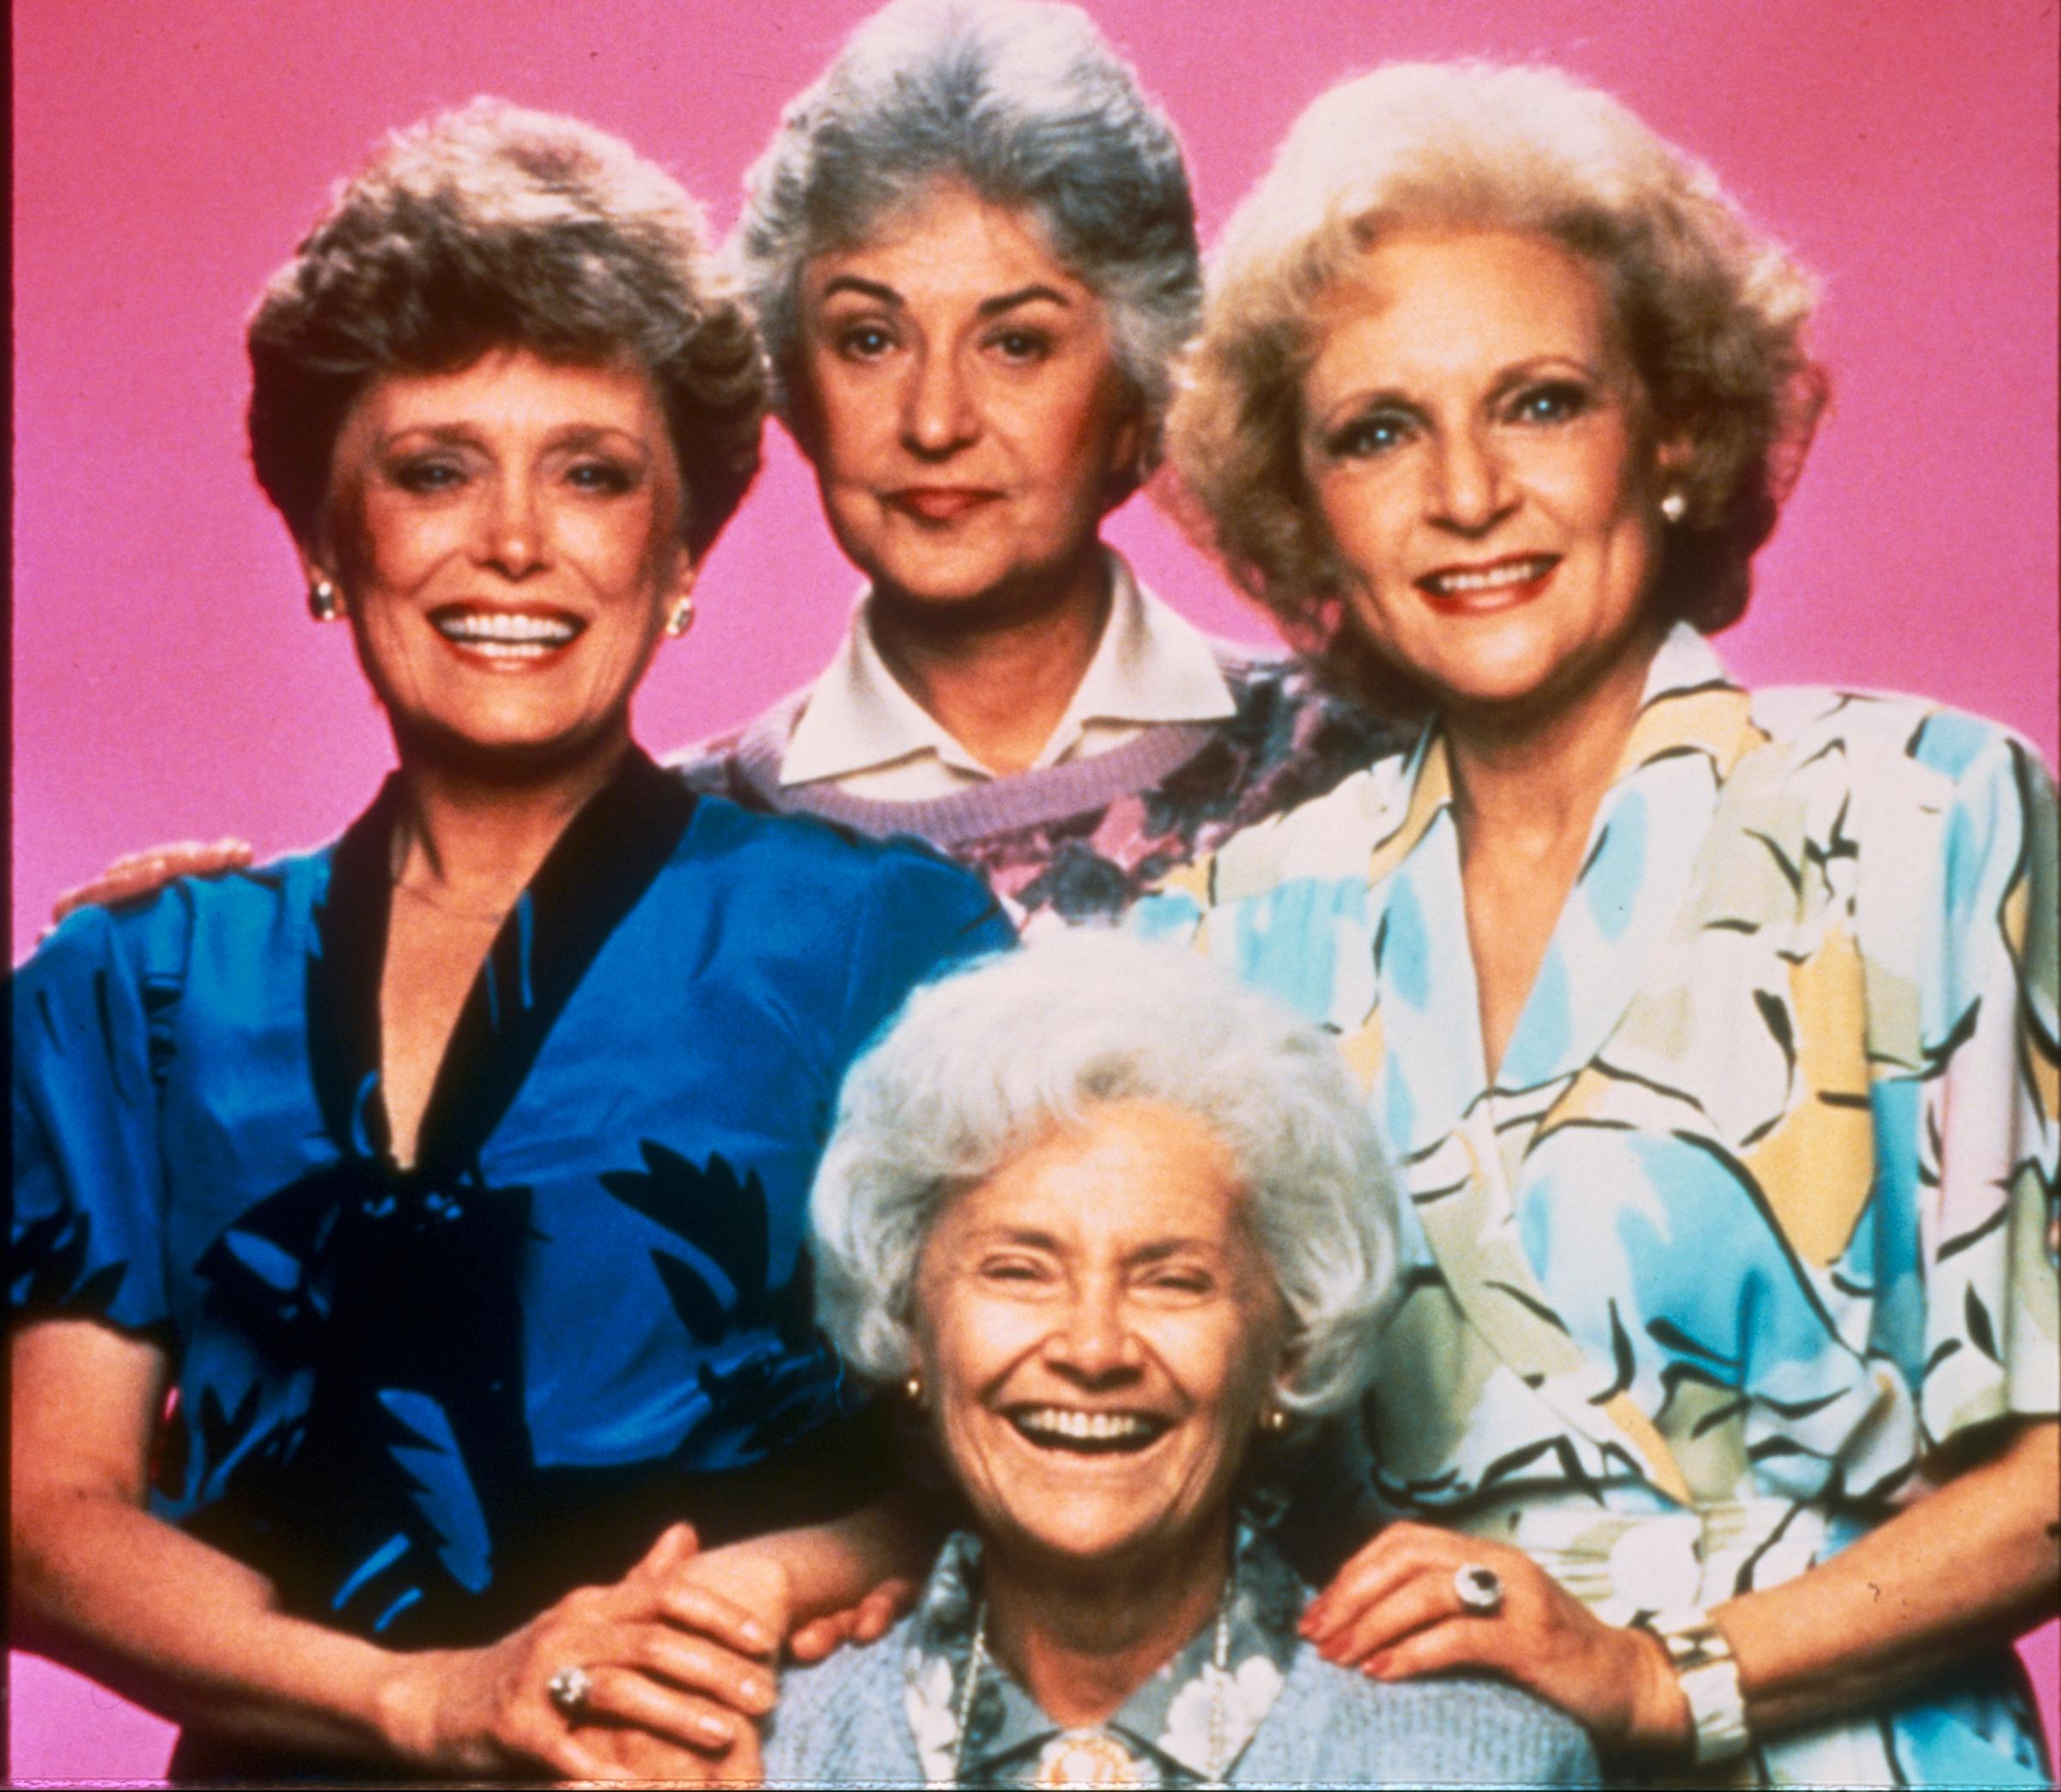 Golden Girls starring Bea Arthur, Betty White, Rue McClanahan and Estelle Getty.